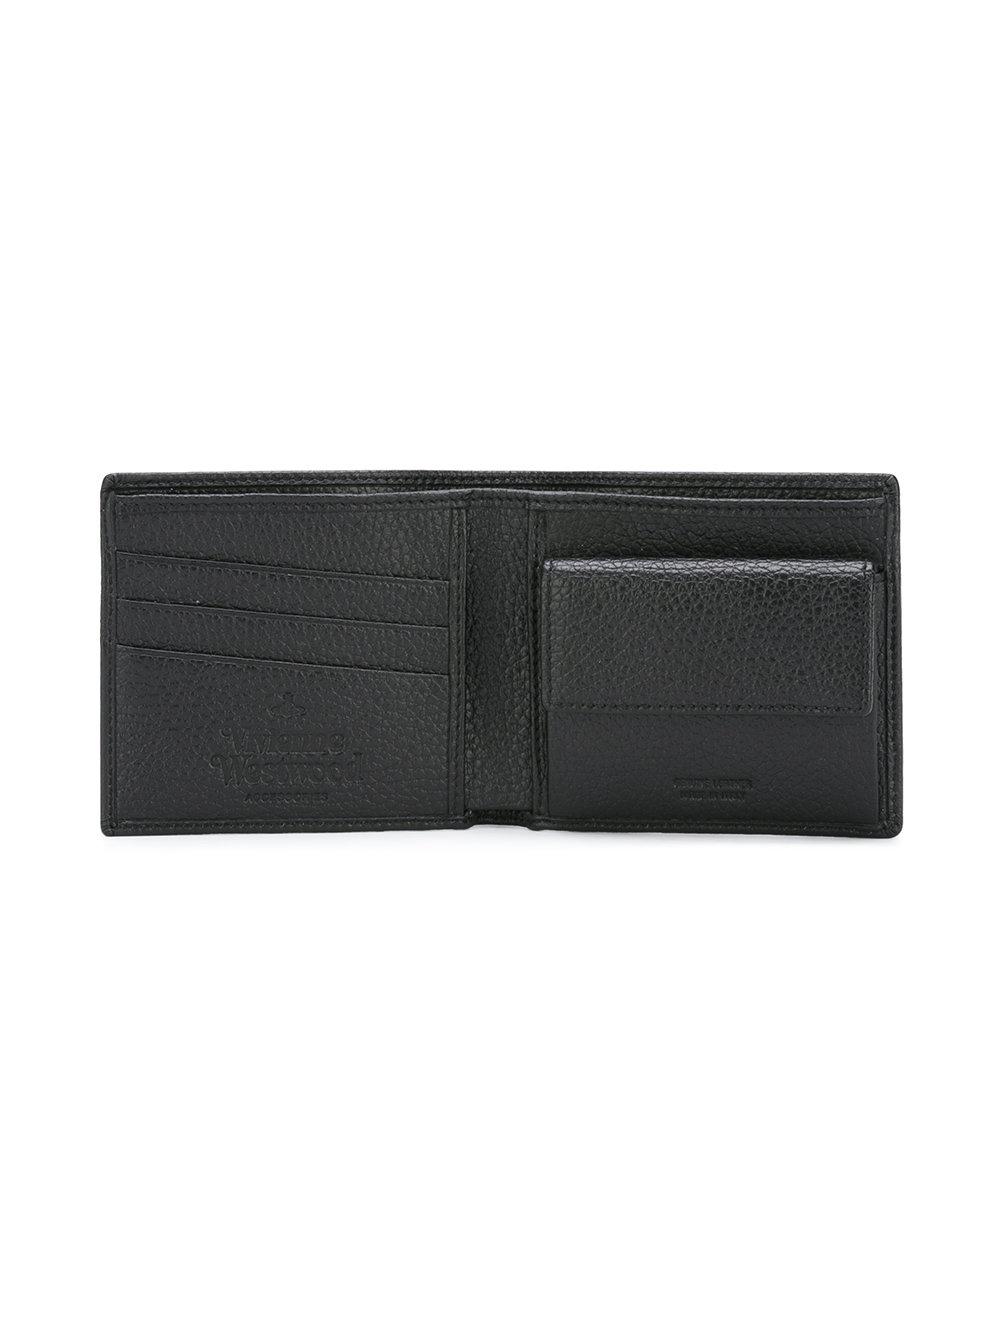 Vivienne Westwood Leather &#39;milano&#39; Wallet With Coin Holder in Black for Men - Lyst